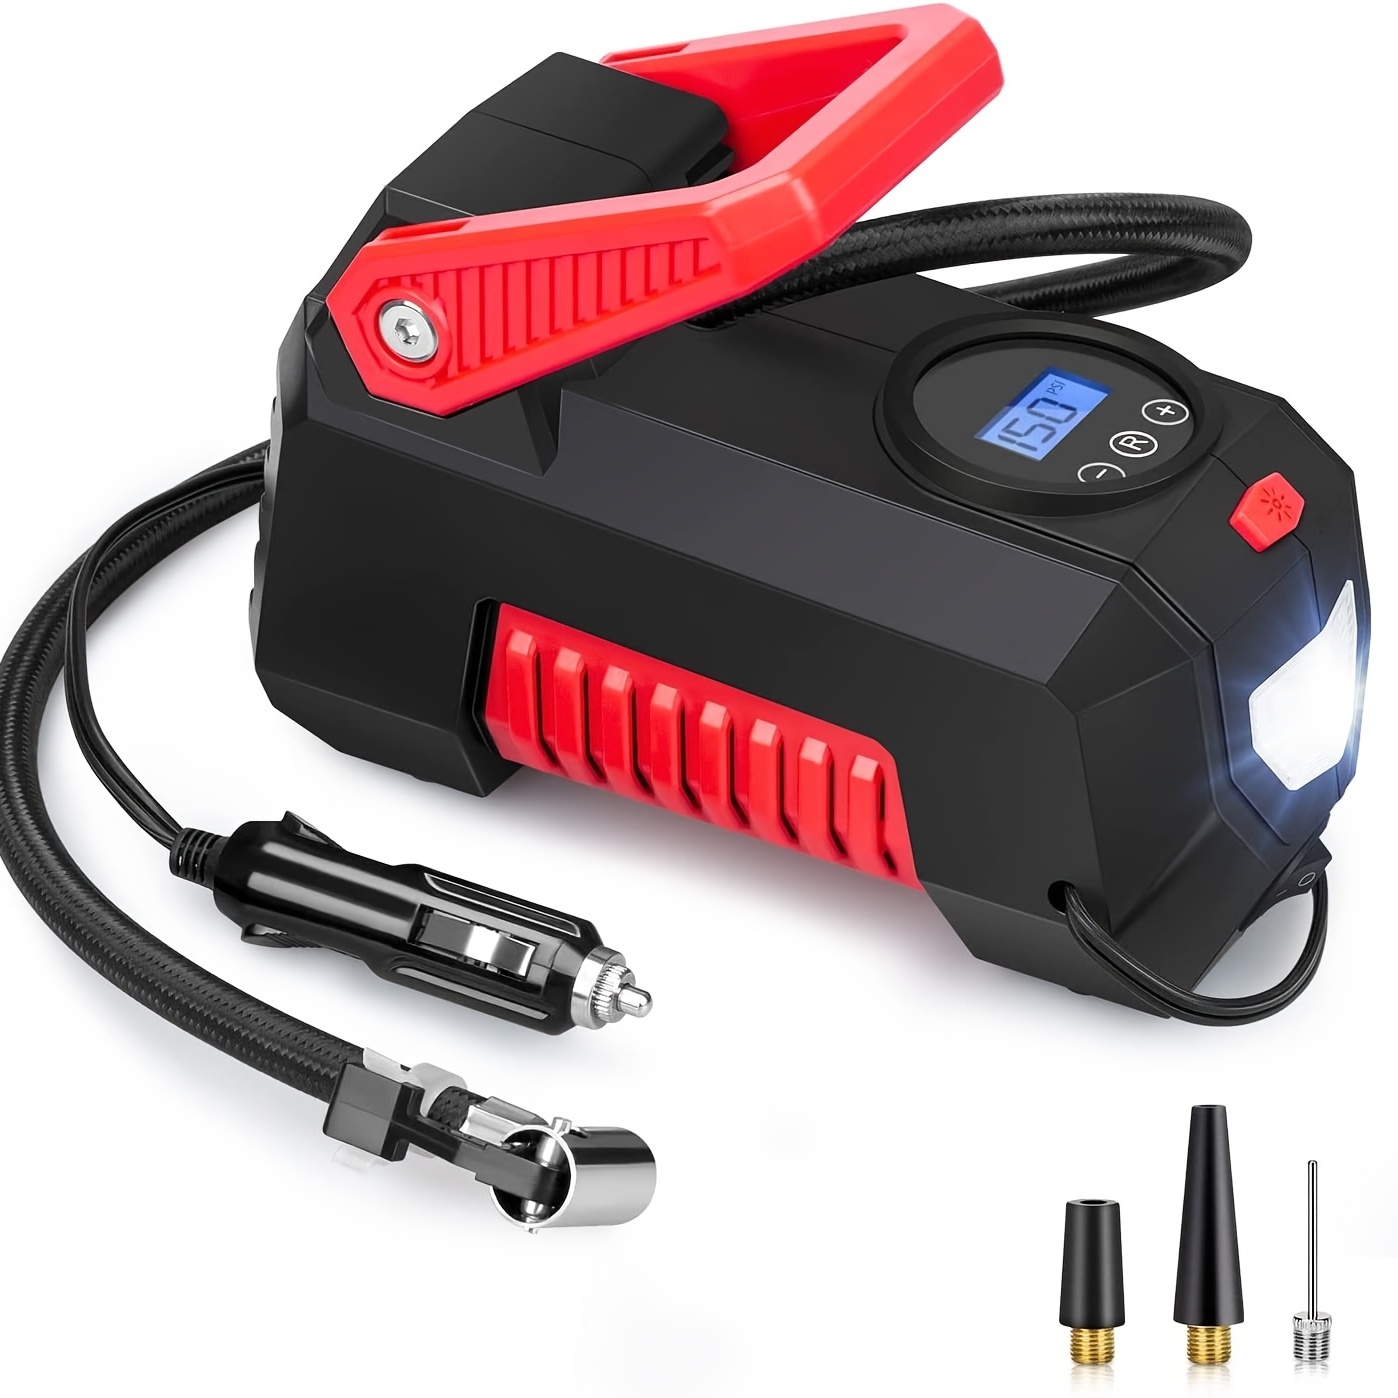 Air Compressor Tire Inflator Portable Air Pump For Car Tires 12V DC Auto  Tire Pump 100PSI With LED Light For Car, Bicycle, And Other Inflatables